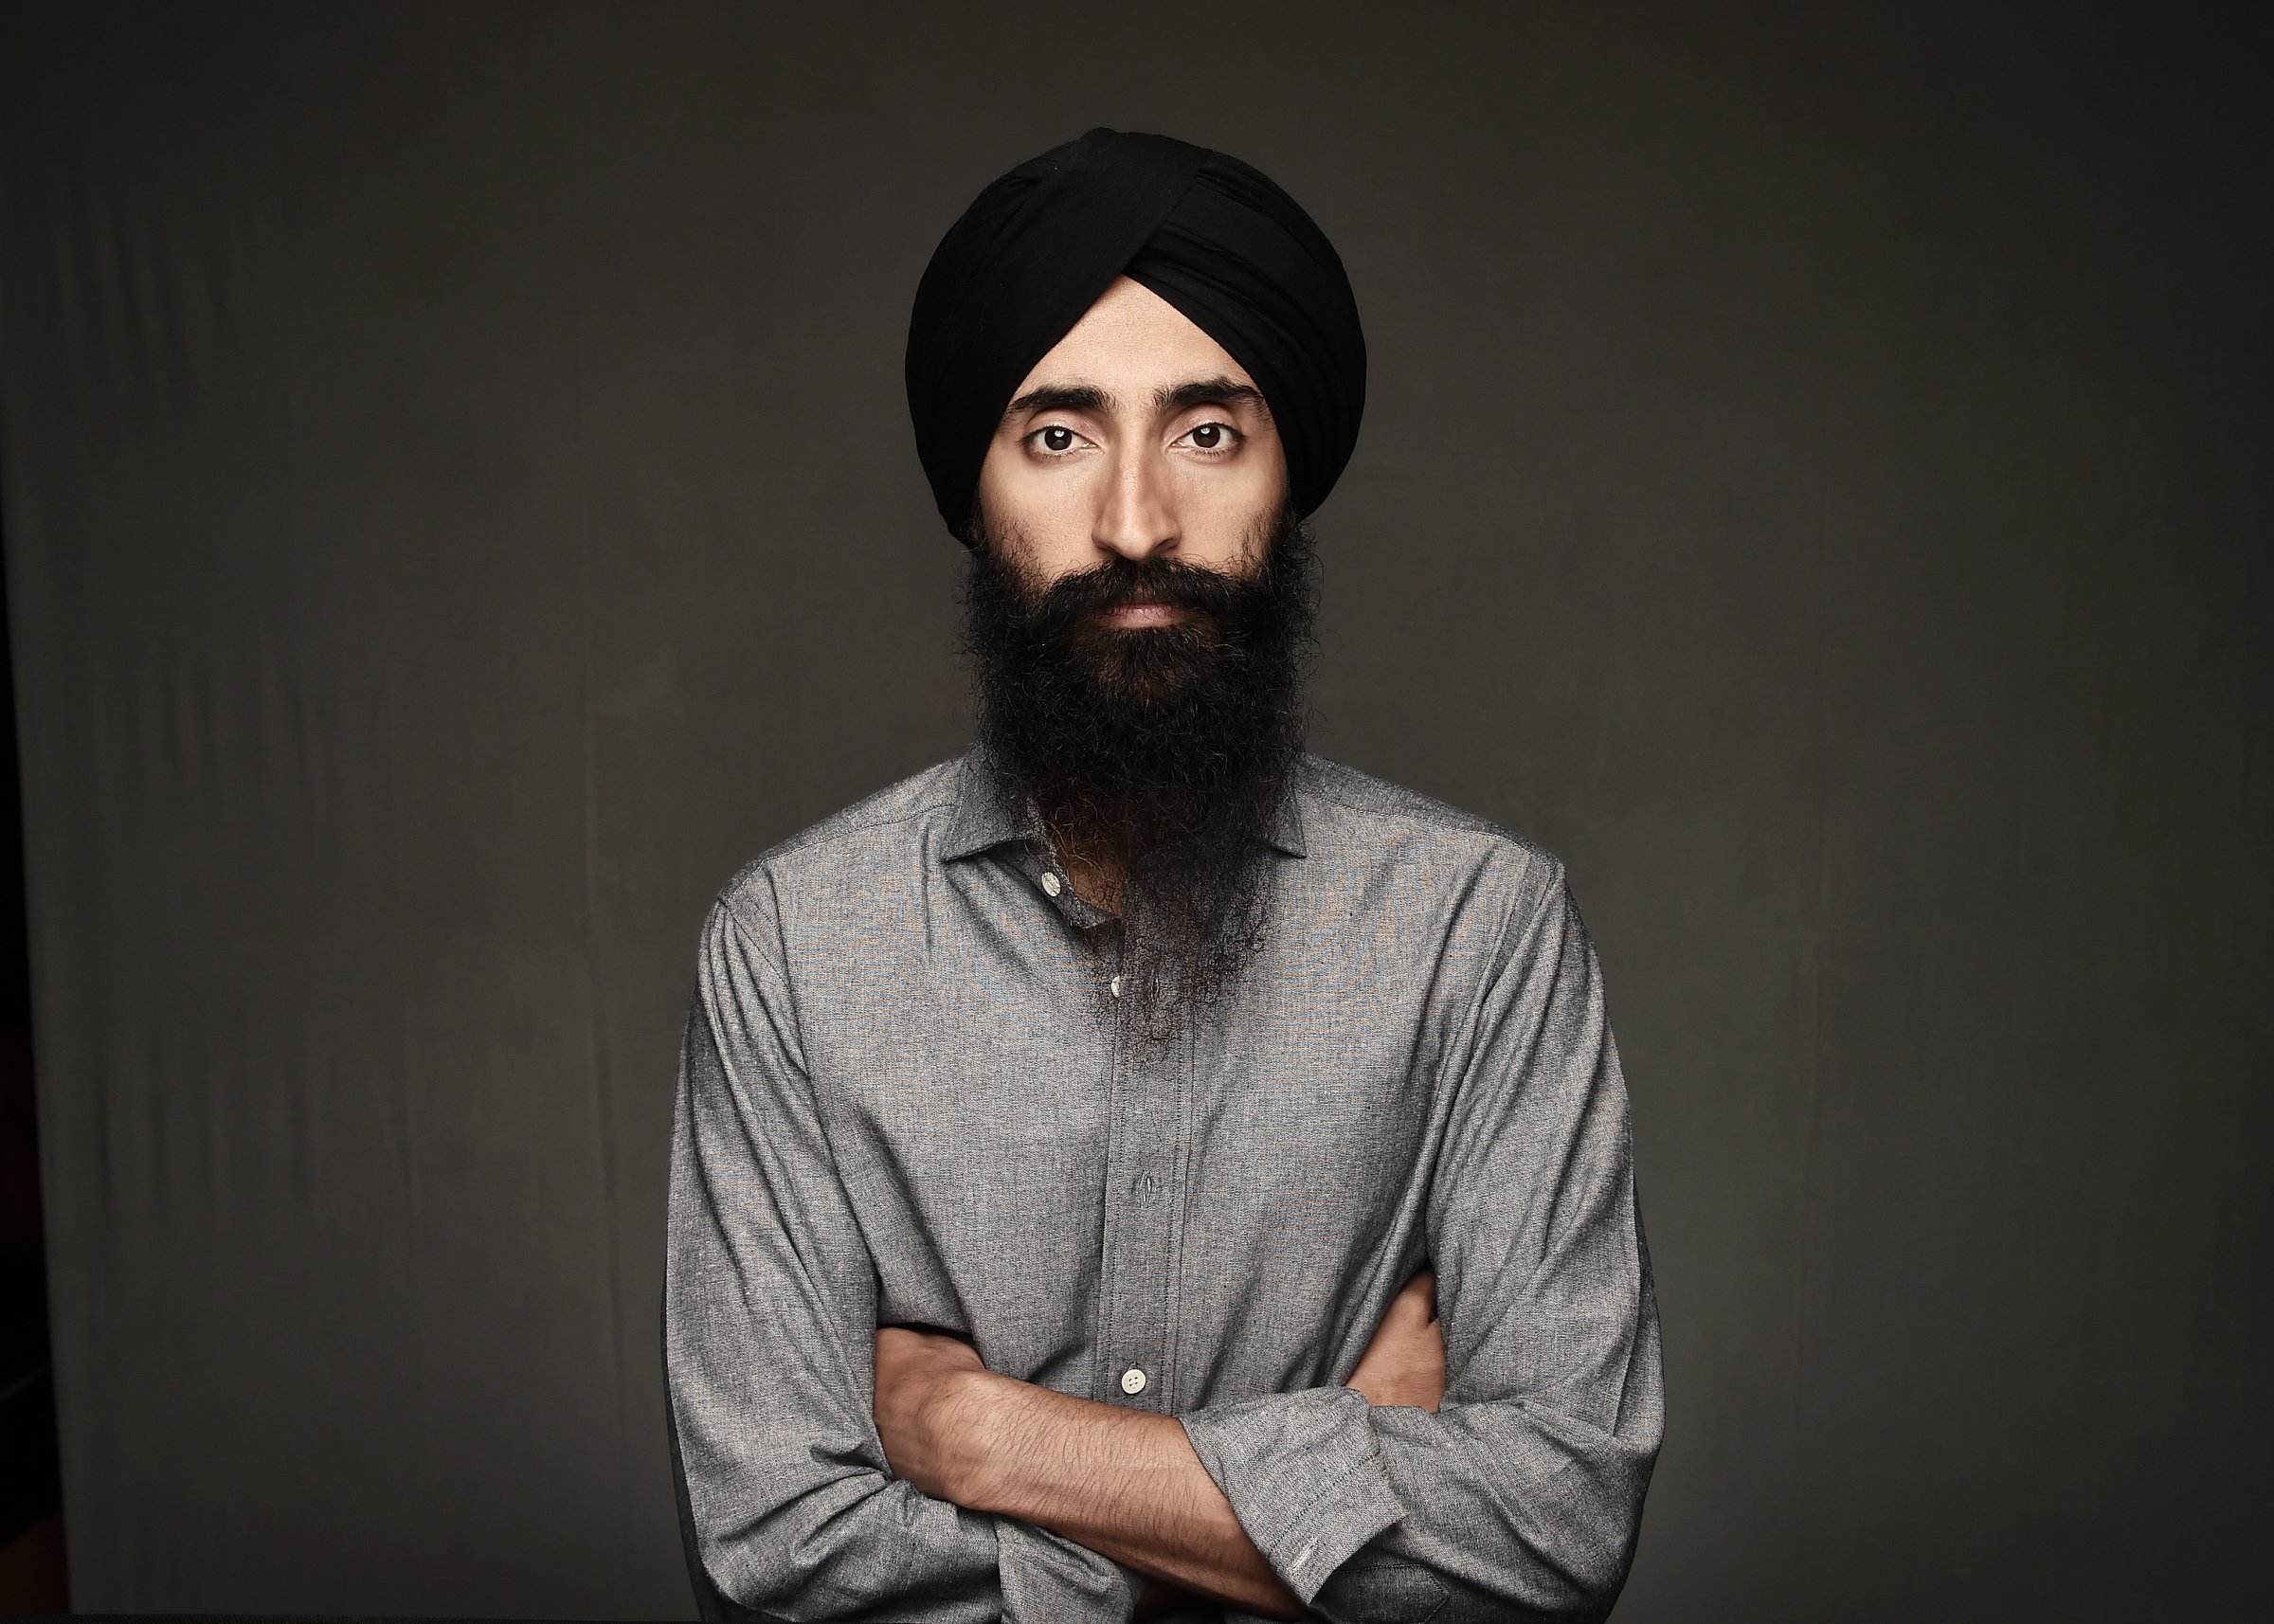 Actor Waris Ahluwalia poses during a portrait session on day seven of the 12th annual Dubai International Film Festival held at the Madinat Jumeriah Complex on Dec. 15, 2015 in Dubai, United Arab Emirates.